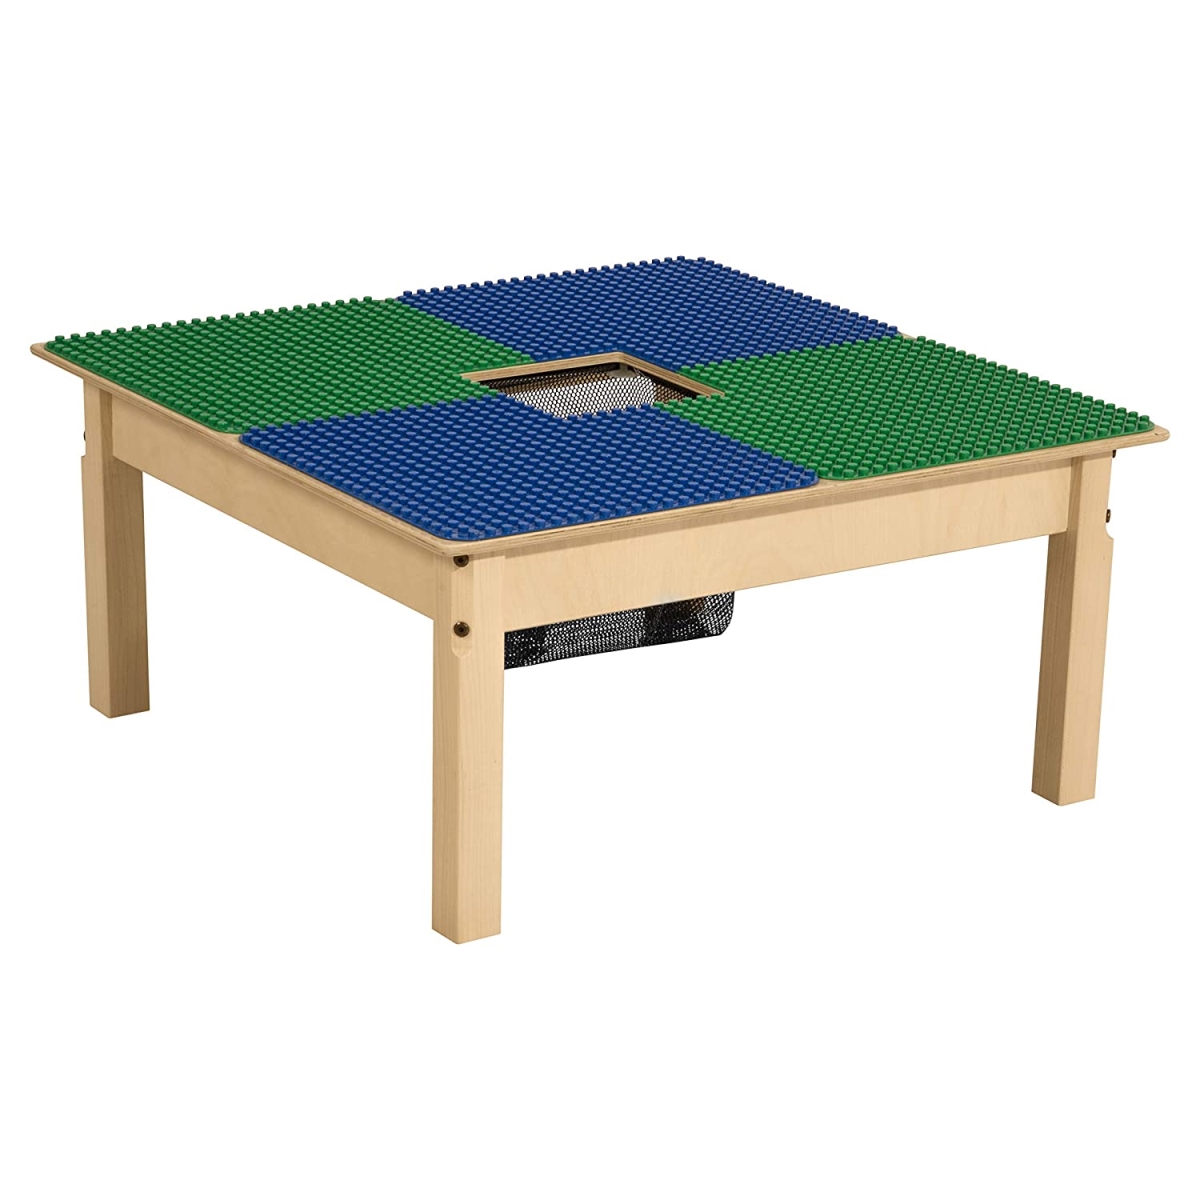 Tp3131pgna1829-bg 18-29 In. Duplo Compatible Table With Adjustable Legs, Blue & Green - Square